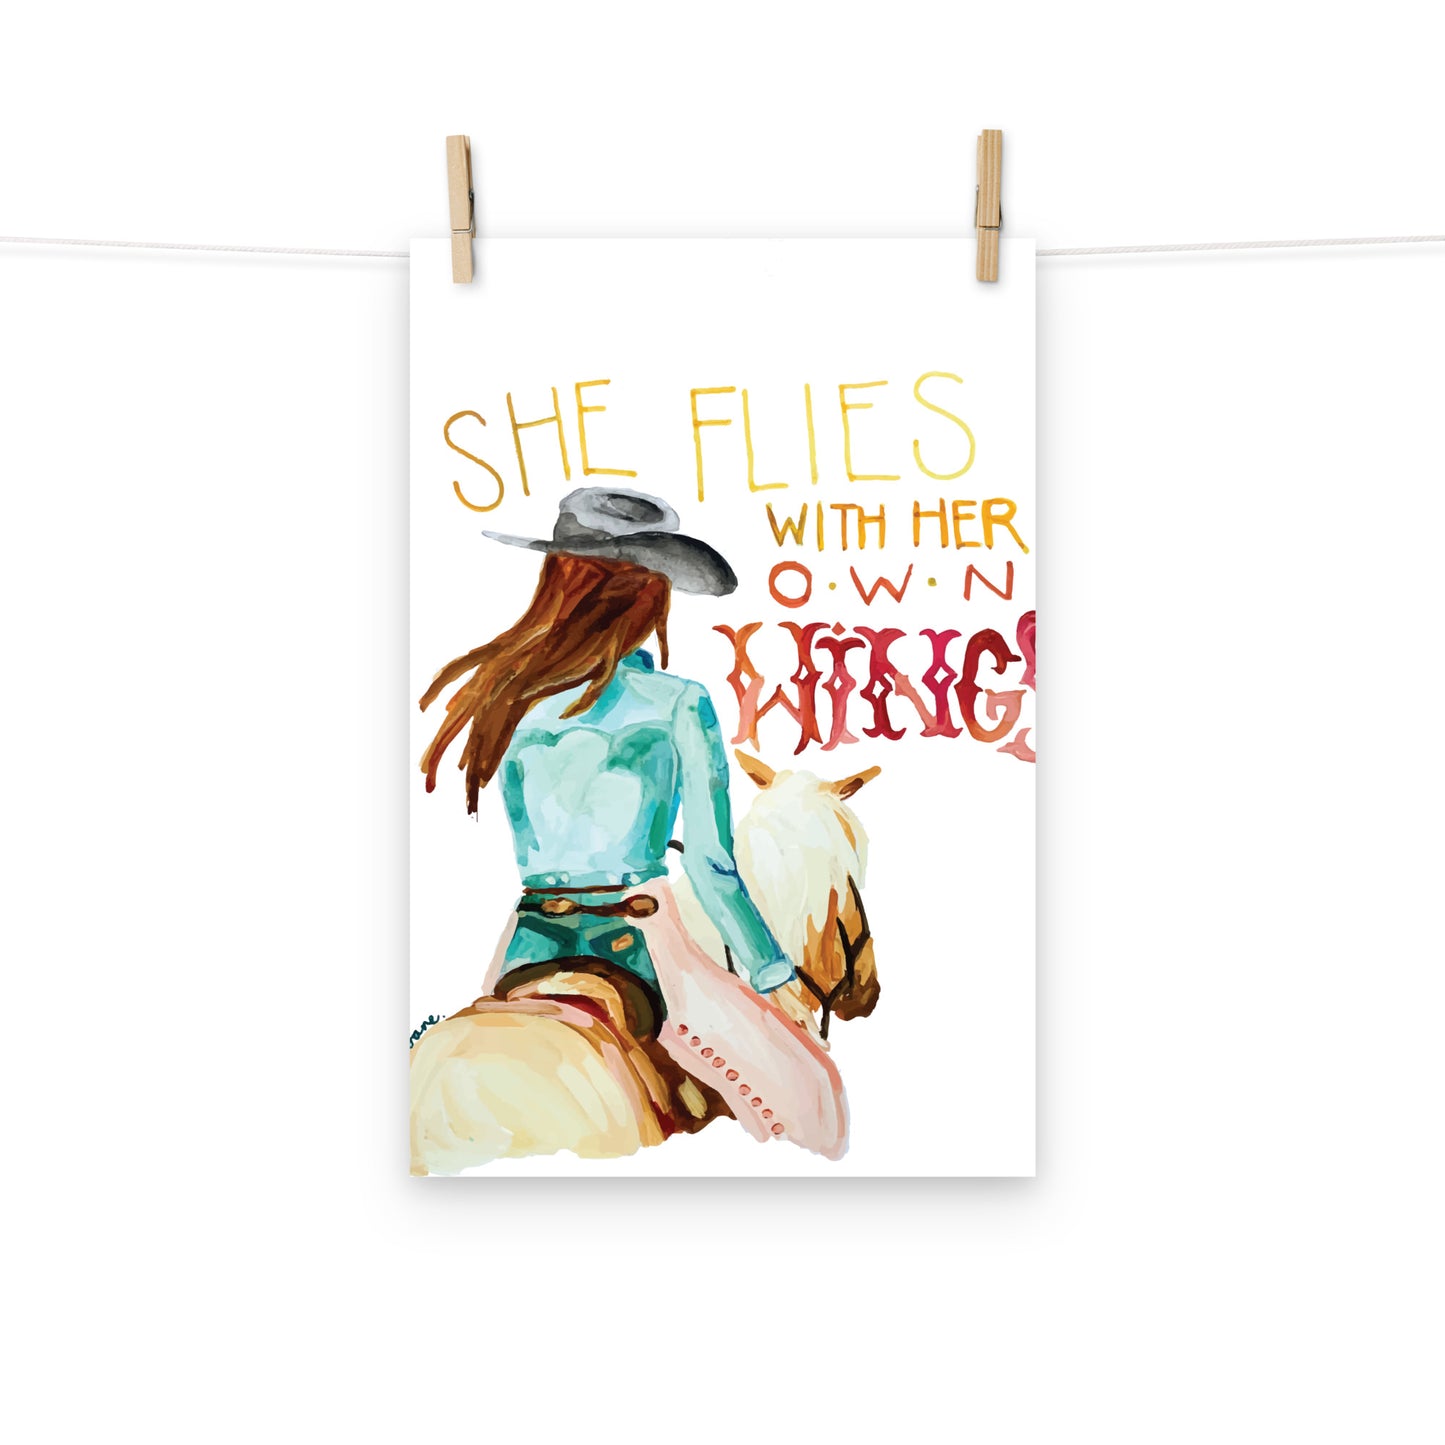 Cowgirl Art Print “She Flies With Her Own Wings” Western Art